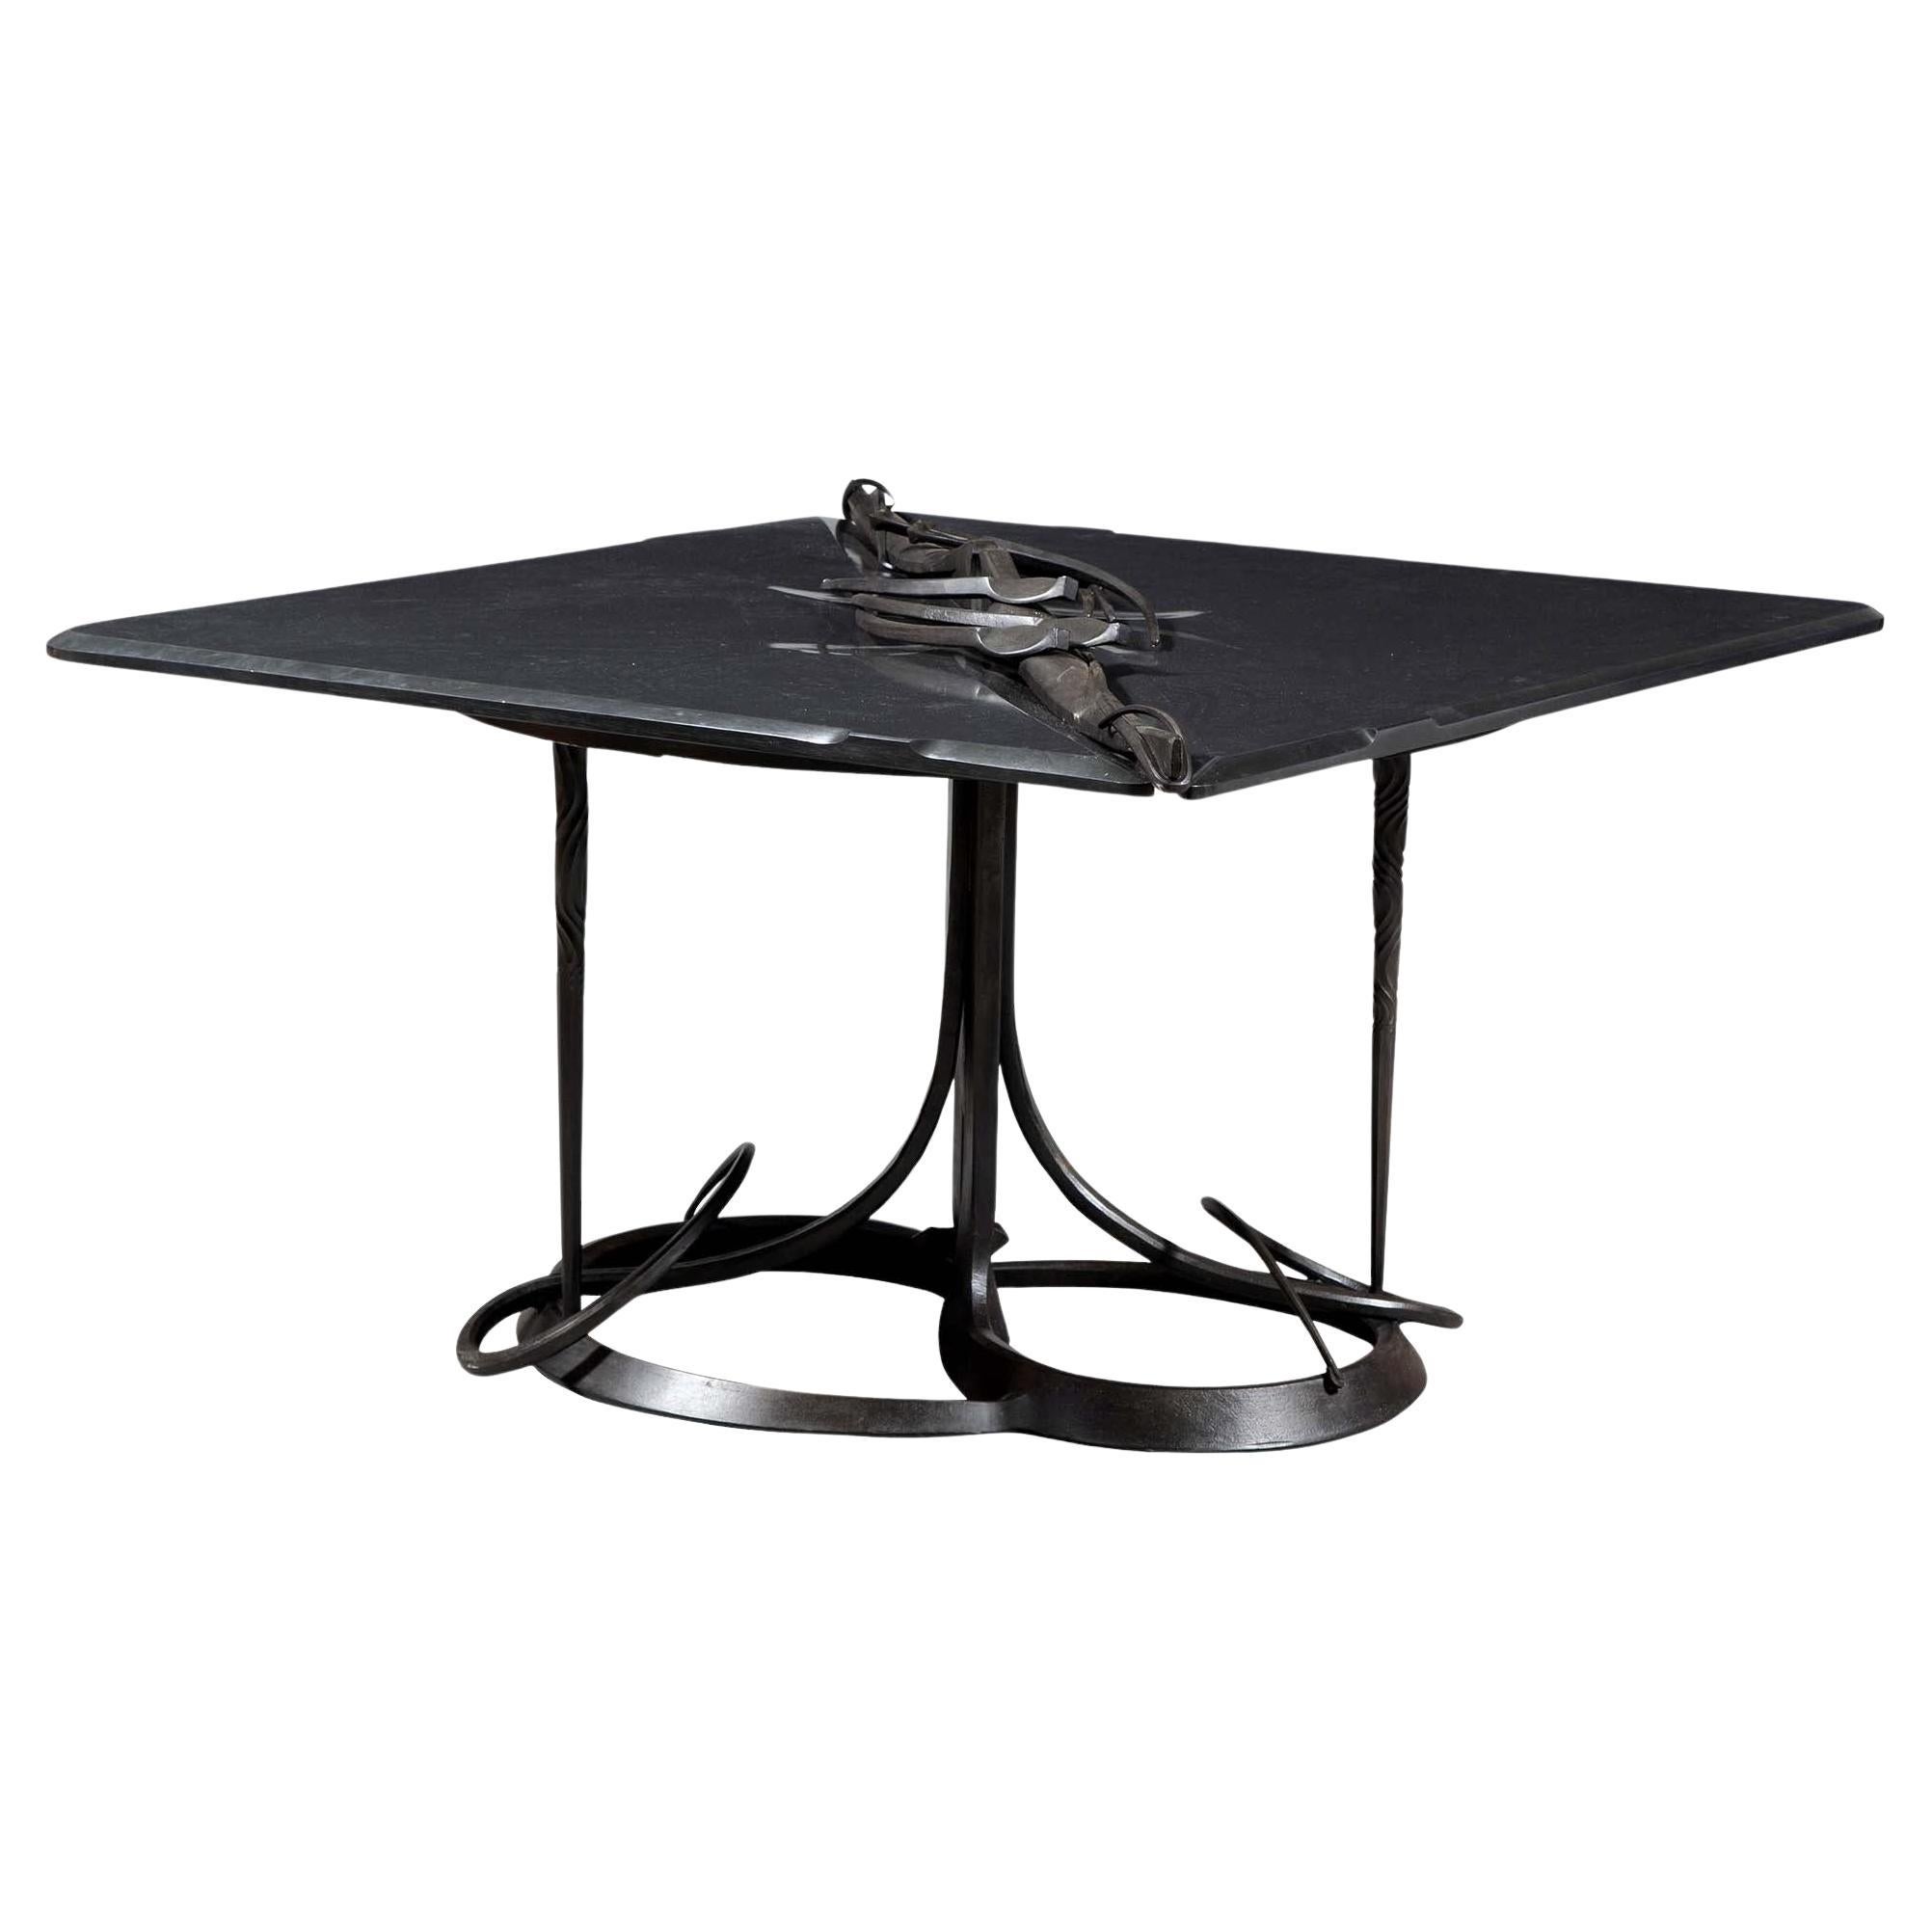 Large Bespoken Sculpted Steel Table with Slate Top Albert Paley